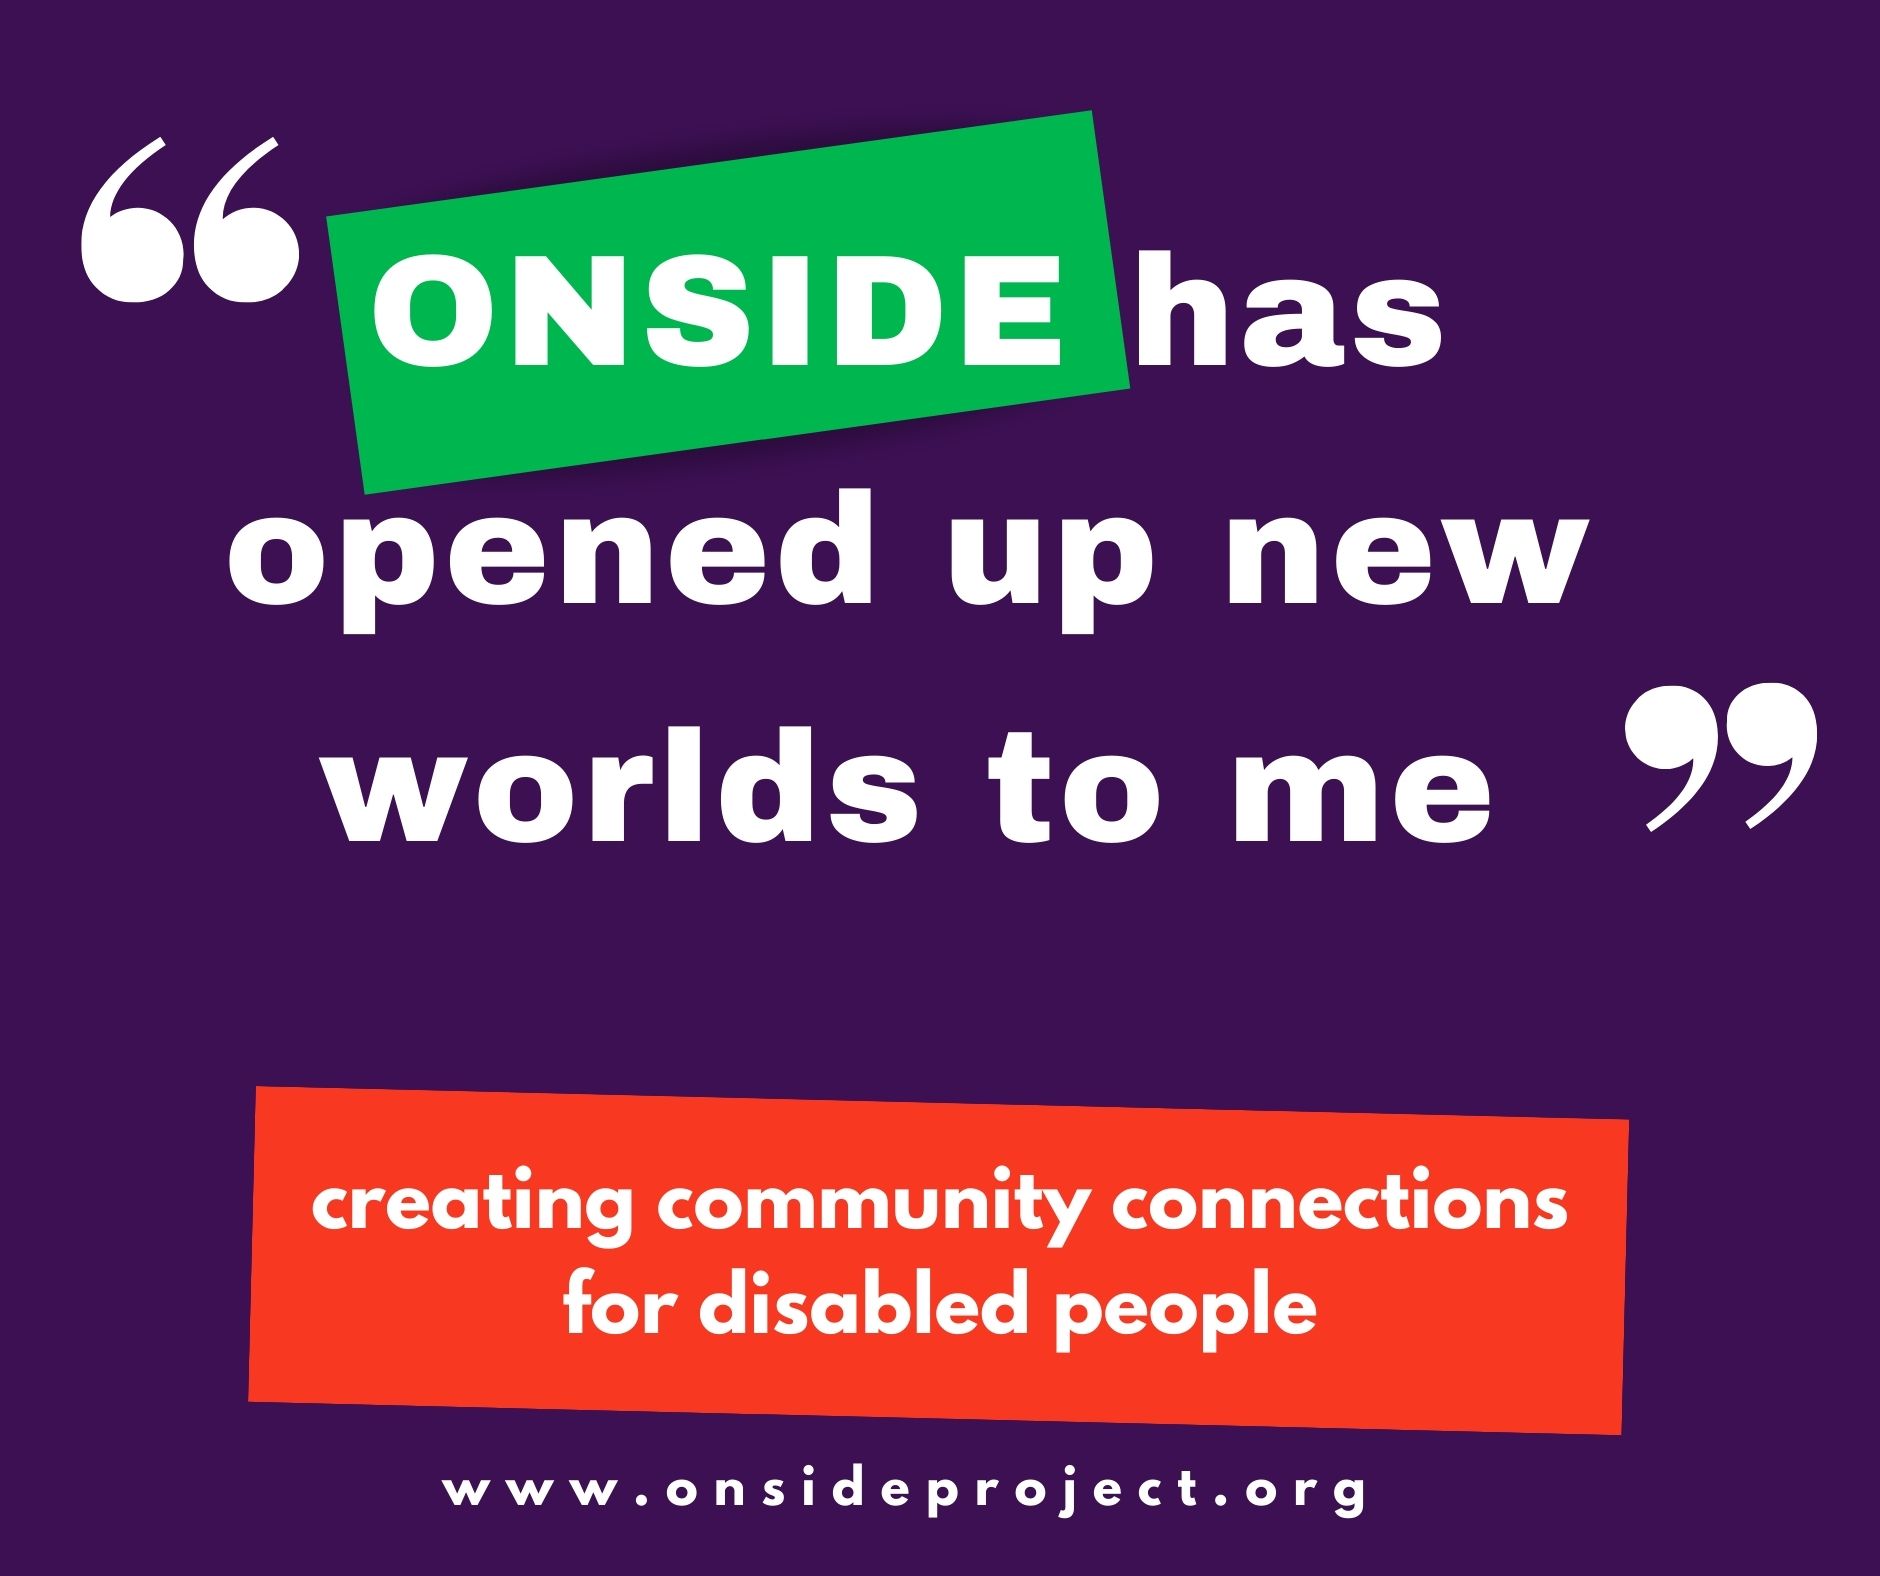 "ONSIDE has opened up new worlds to me." Creating community connections for disabled people www.onsideproject.org